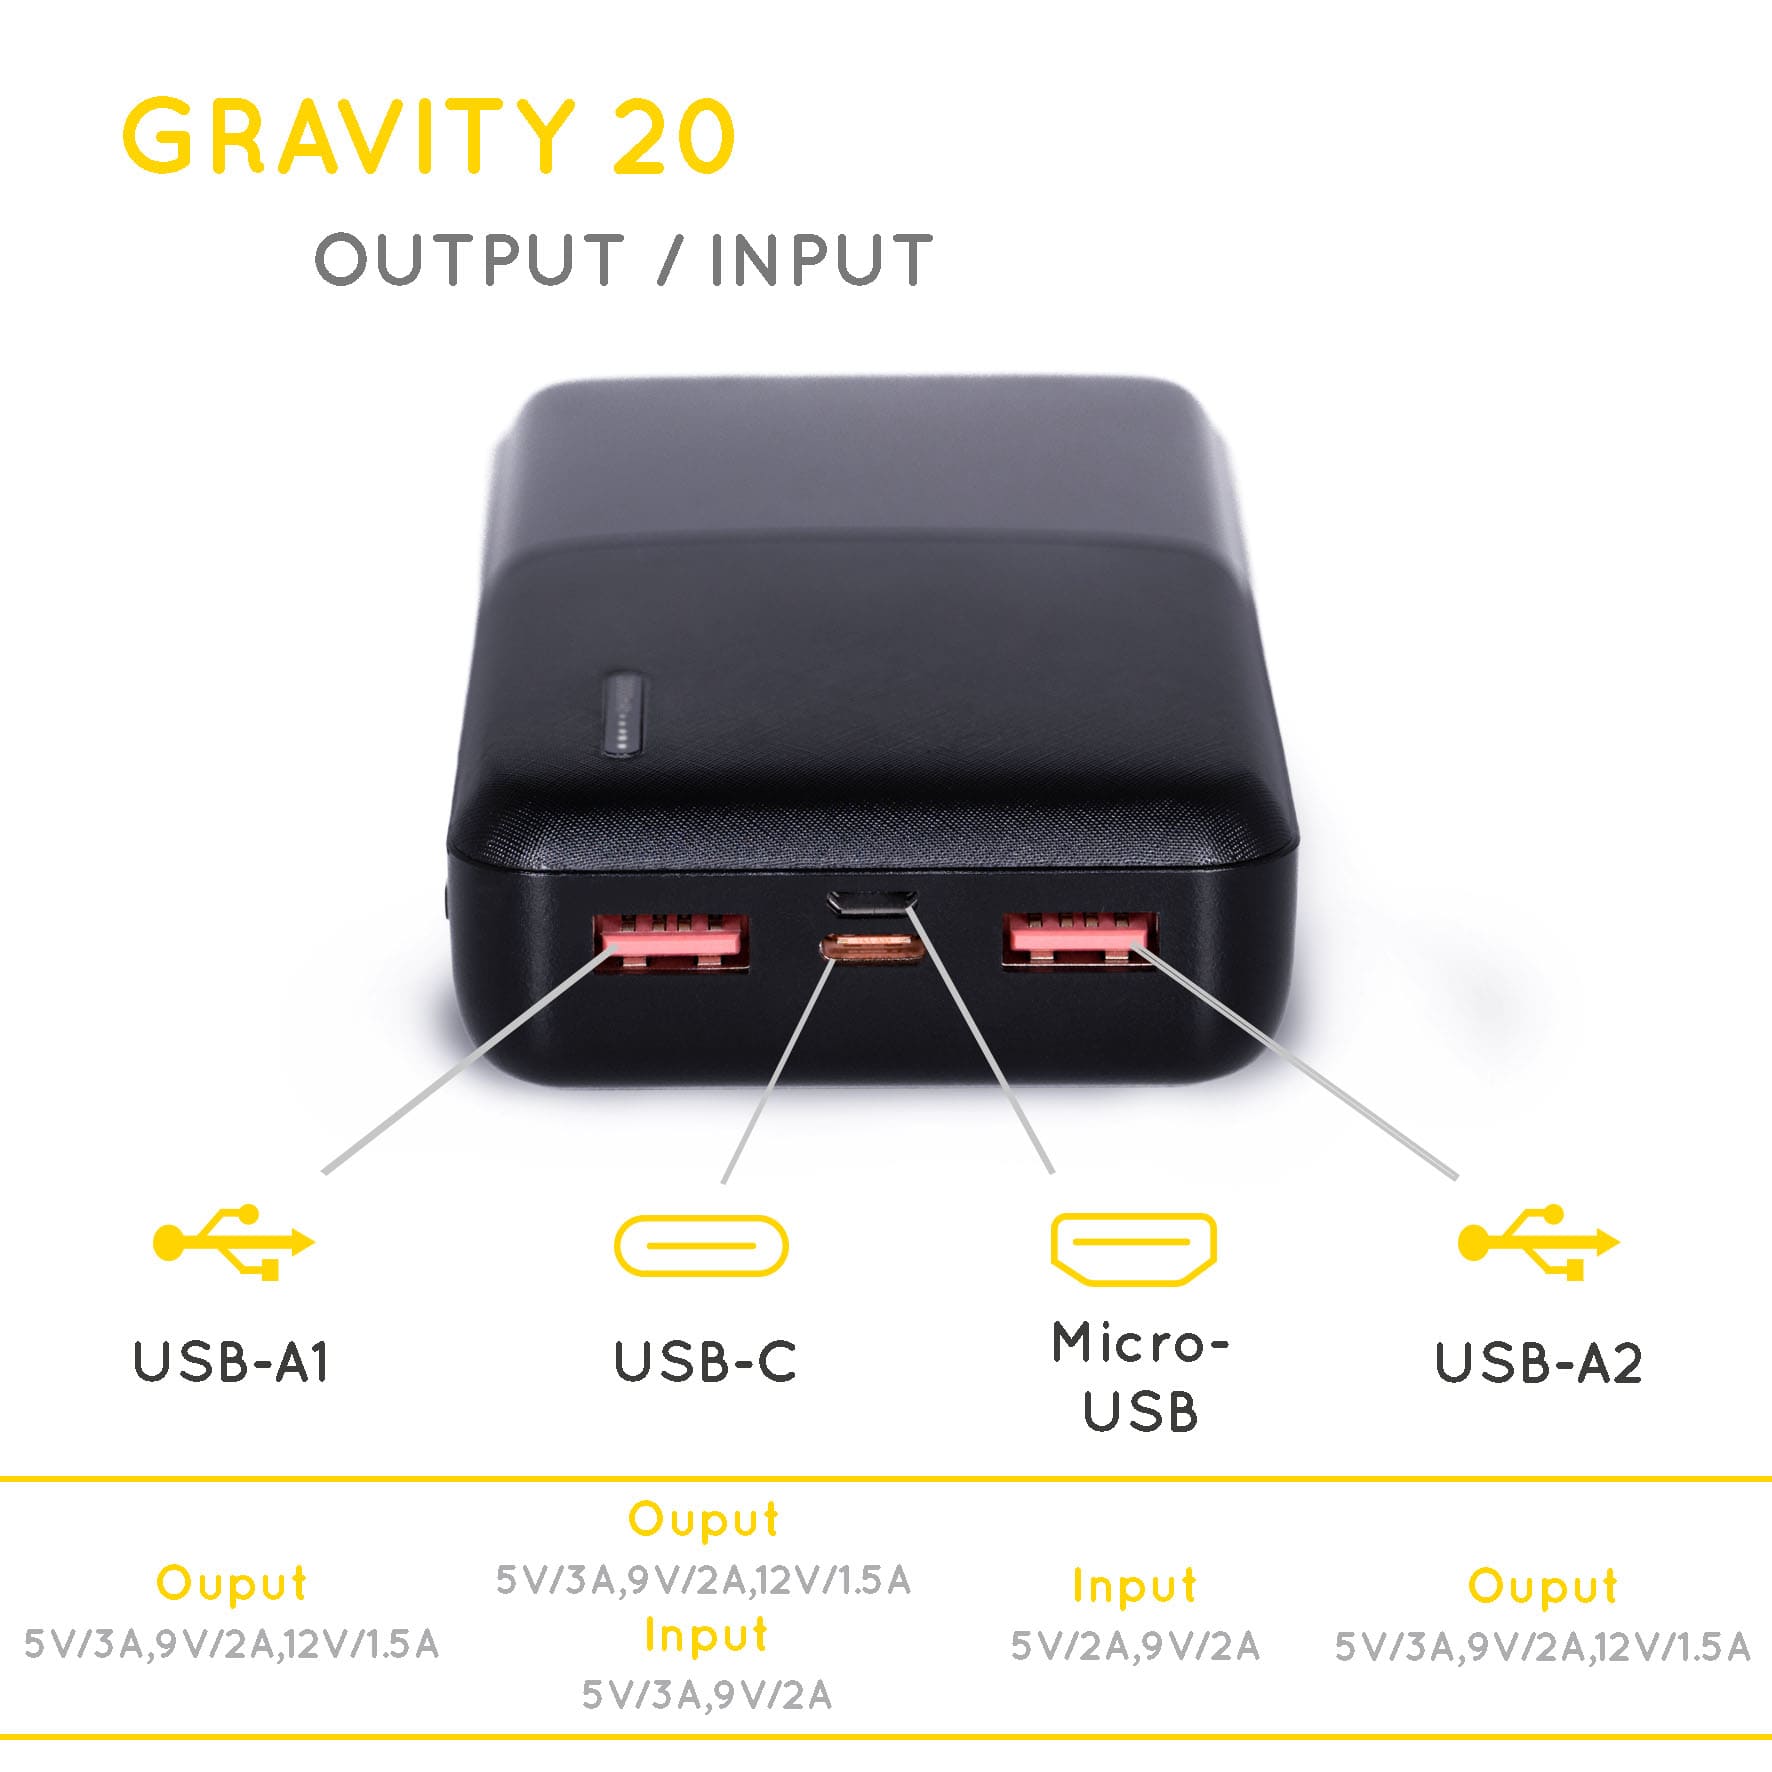 photo zoomed in on the USB port of a compact Gravity20 powerbank with its specifications